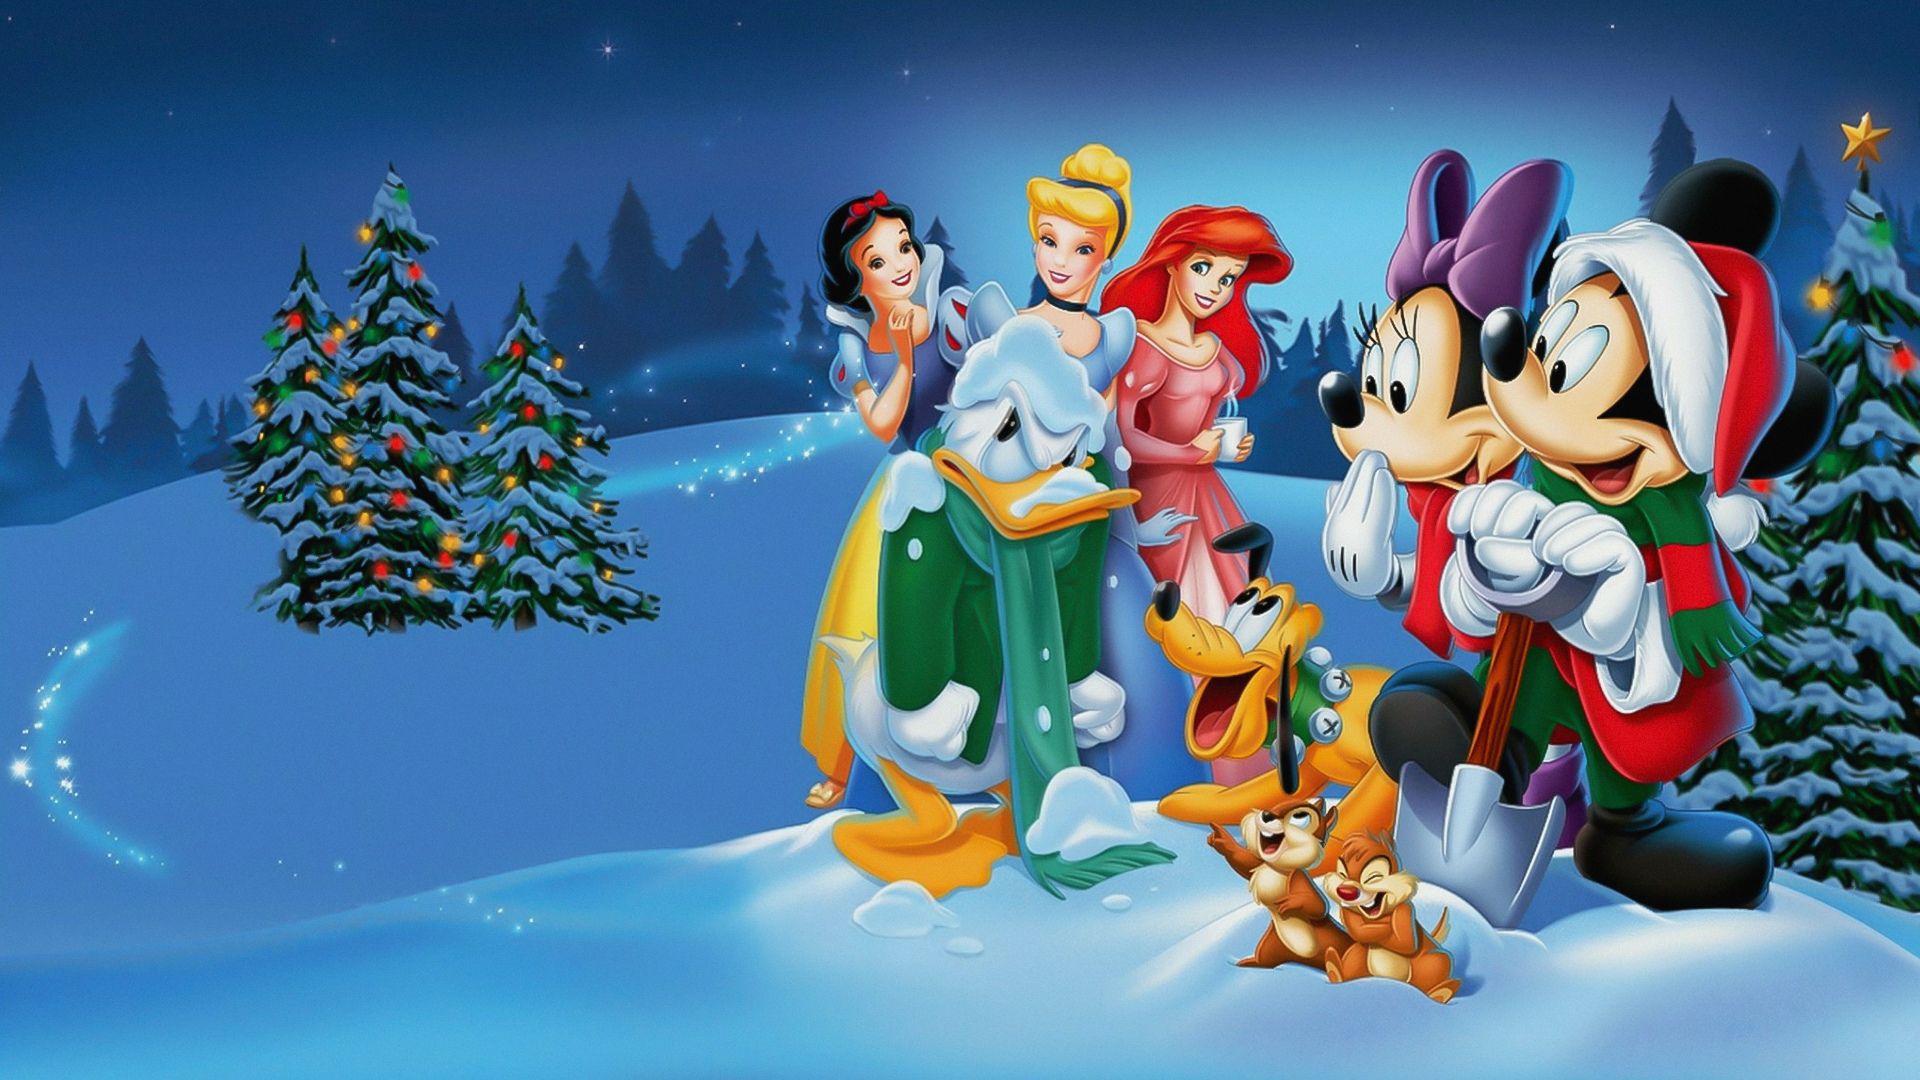 Mickey's Magical Christmas: Snowed in at the House of Mouse background